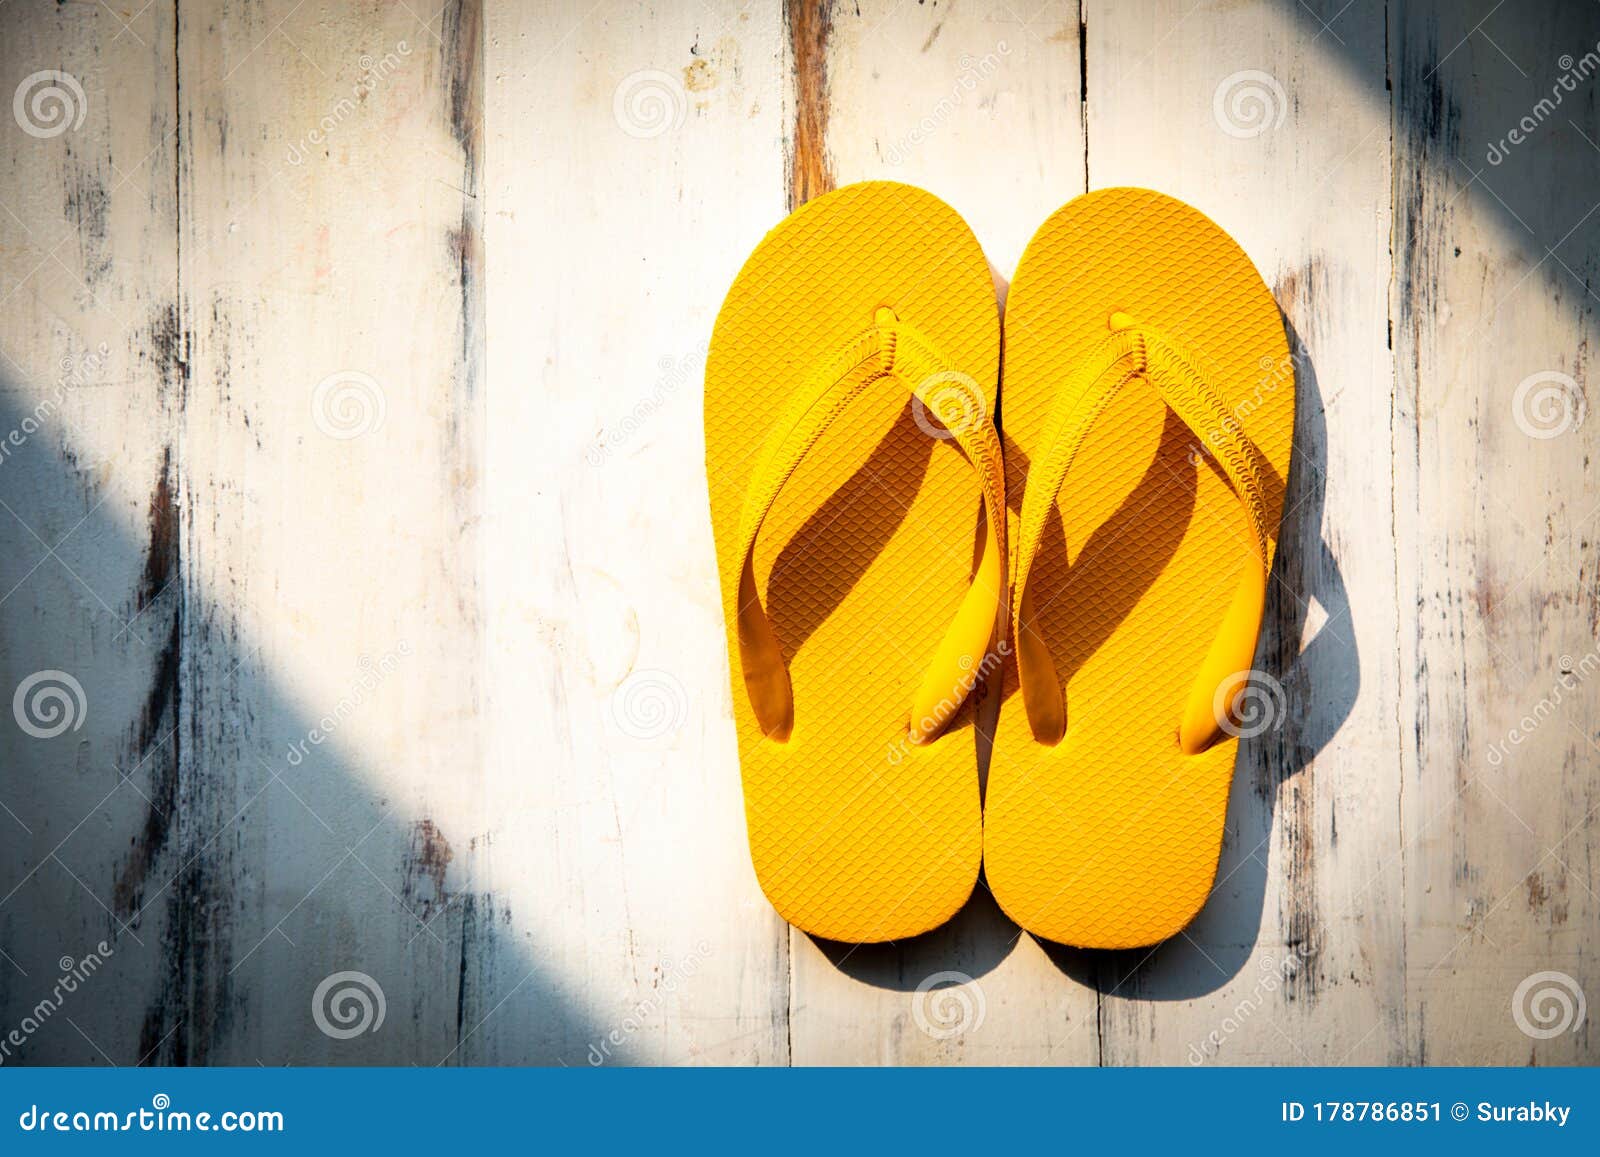 Pair of Yellow Slippers on Wood Background Image - Image of fashion, rubber: 178786851